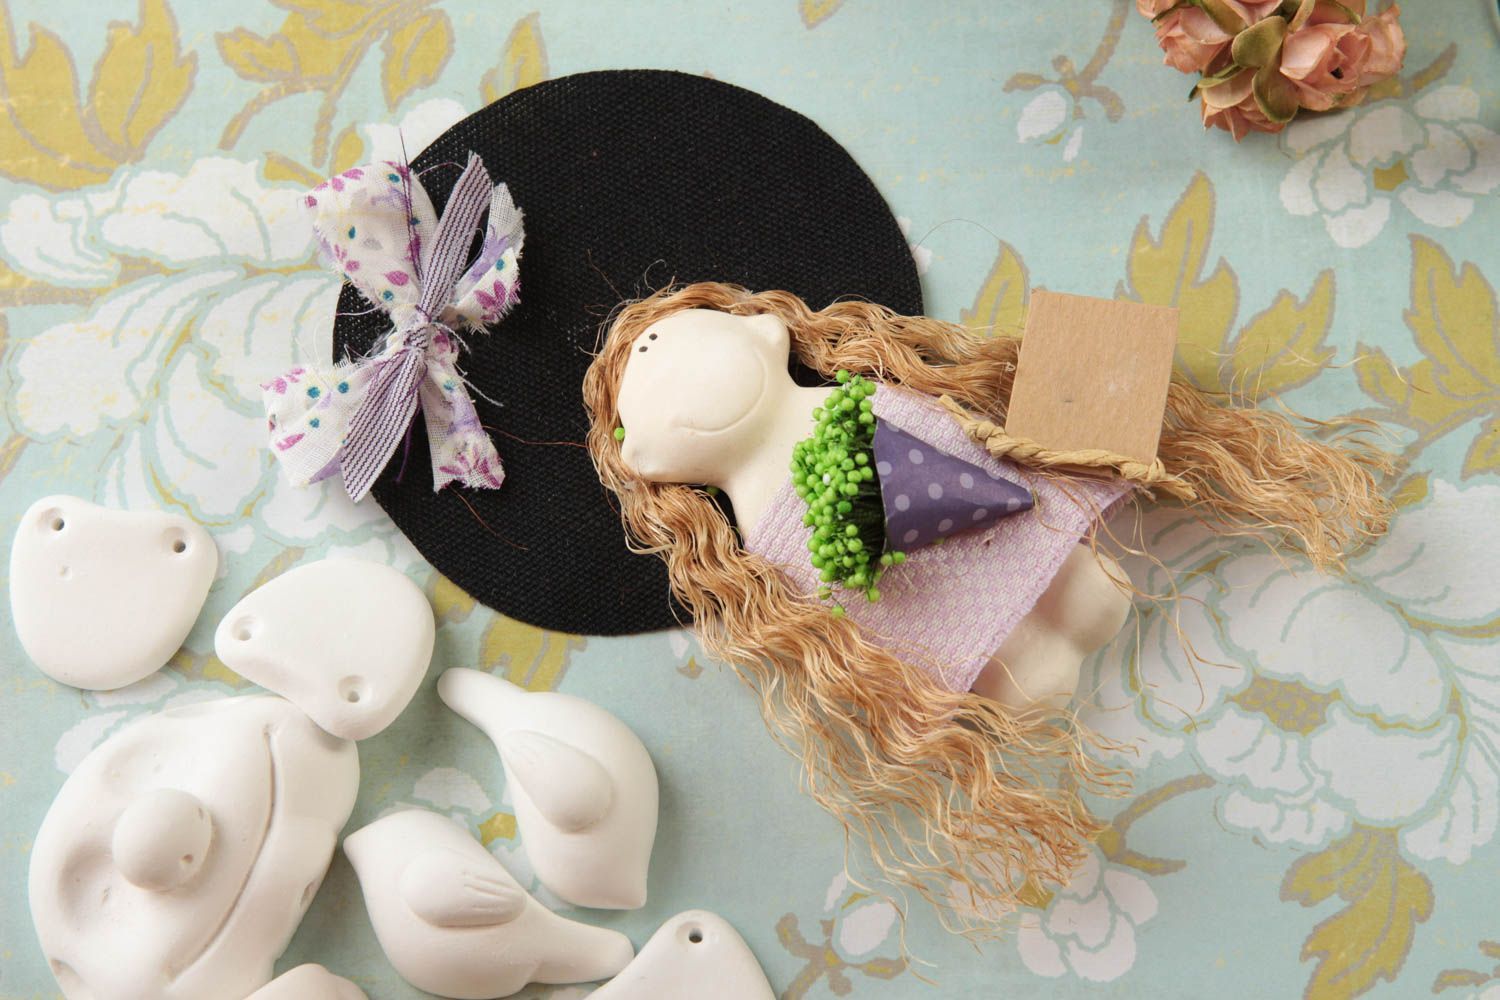 Handmade decorative toy rag doll home decoration gift ideas decorative use only photo 1